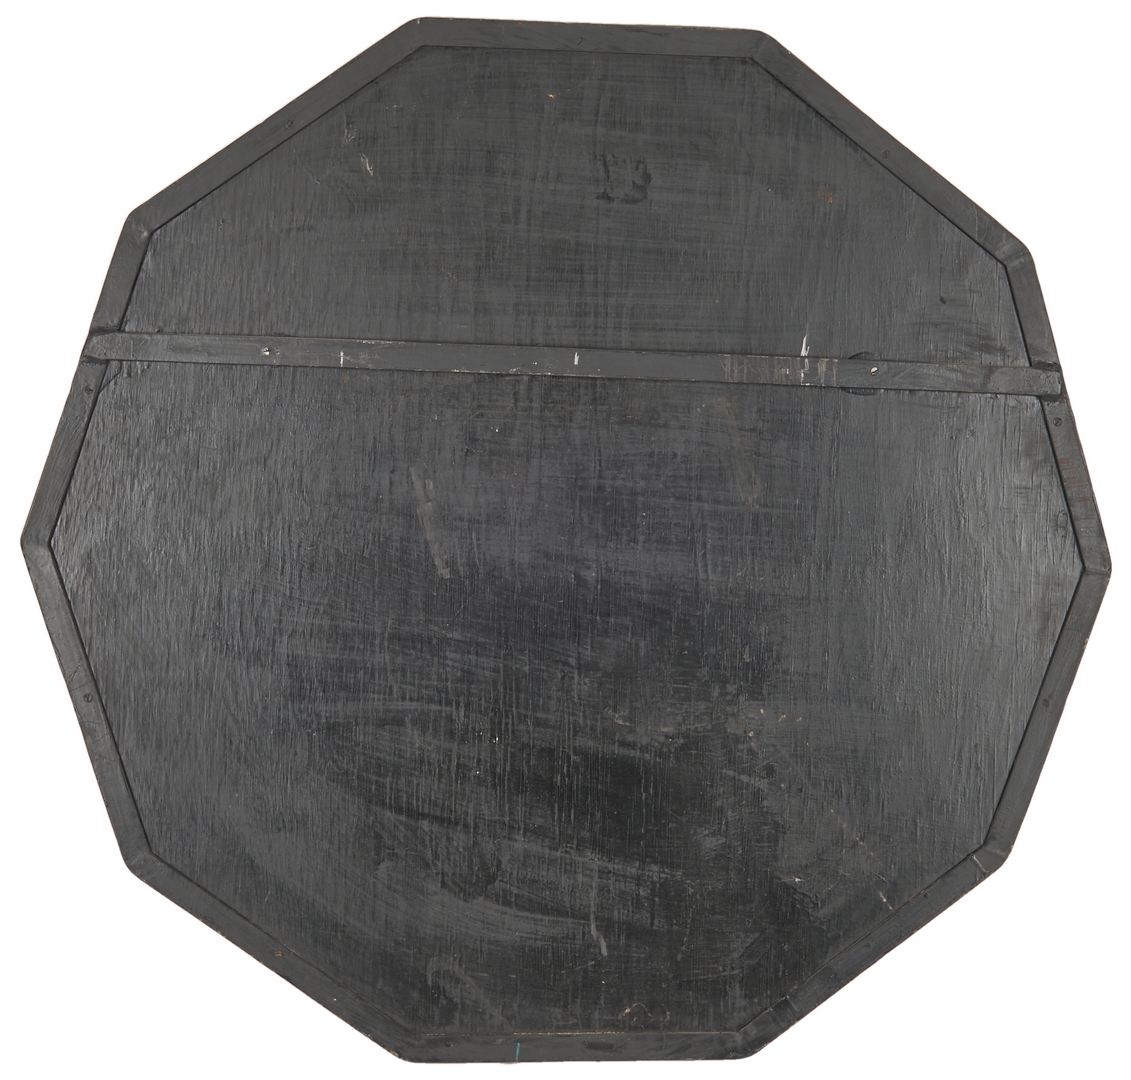 Lot 510: Charles Counts Pottery Decagonal Plaque